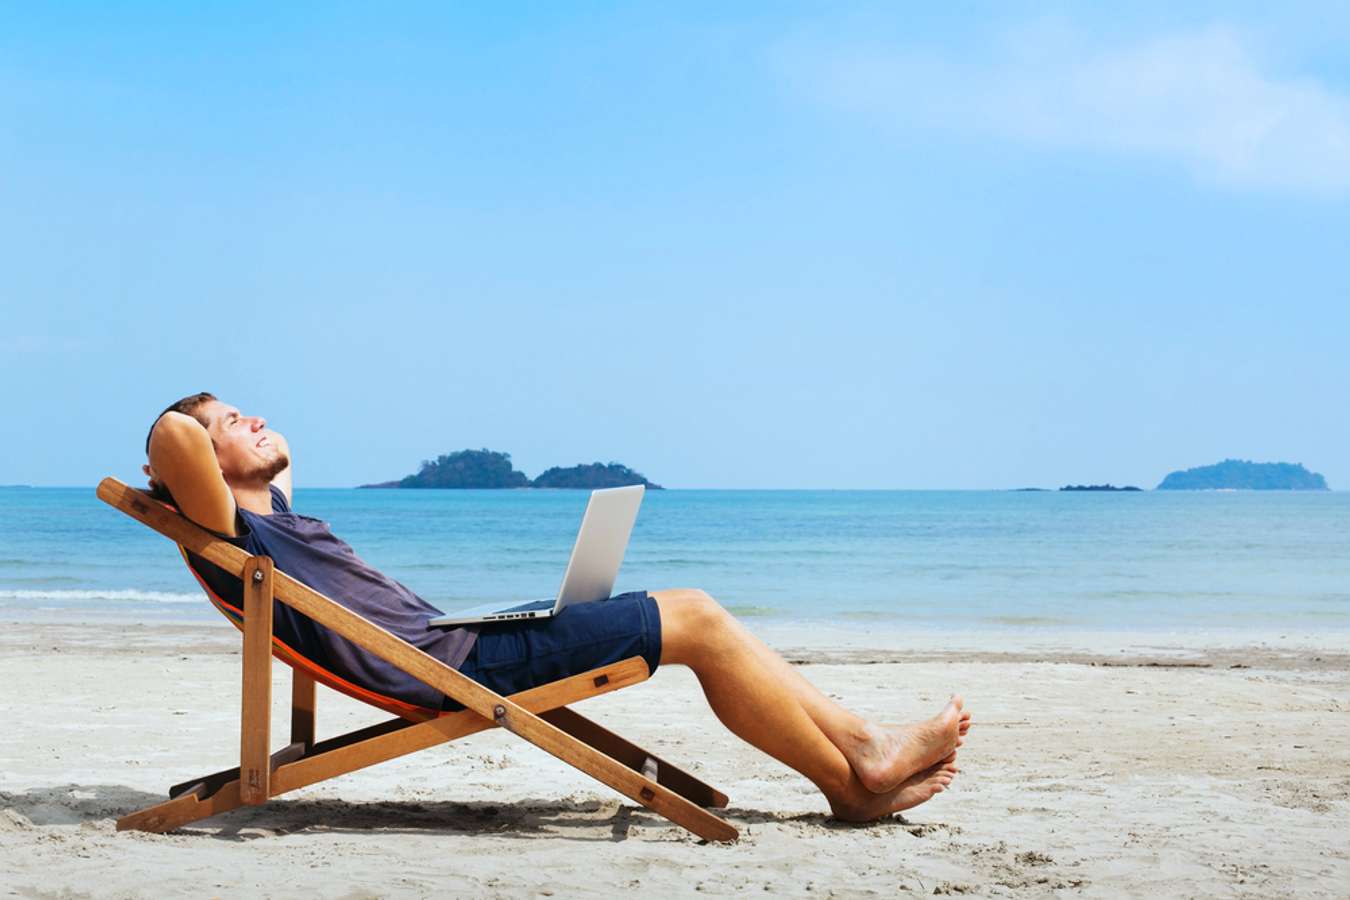 Work online to make money while traveling